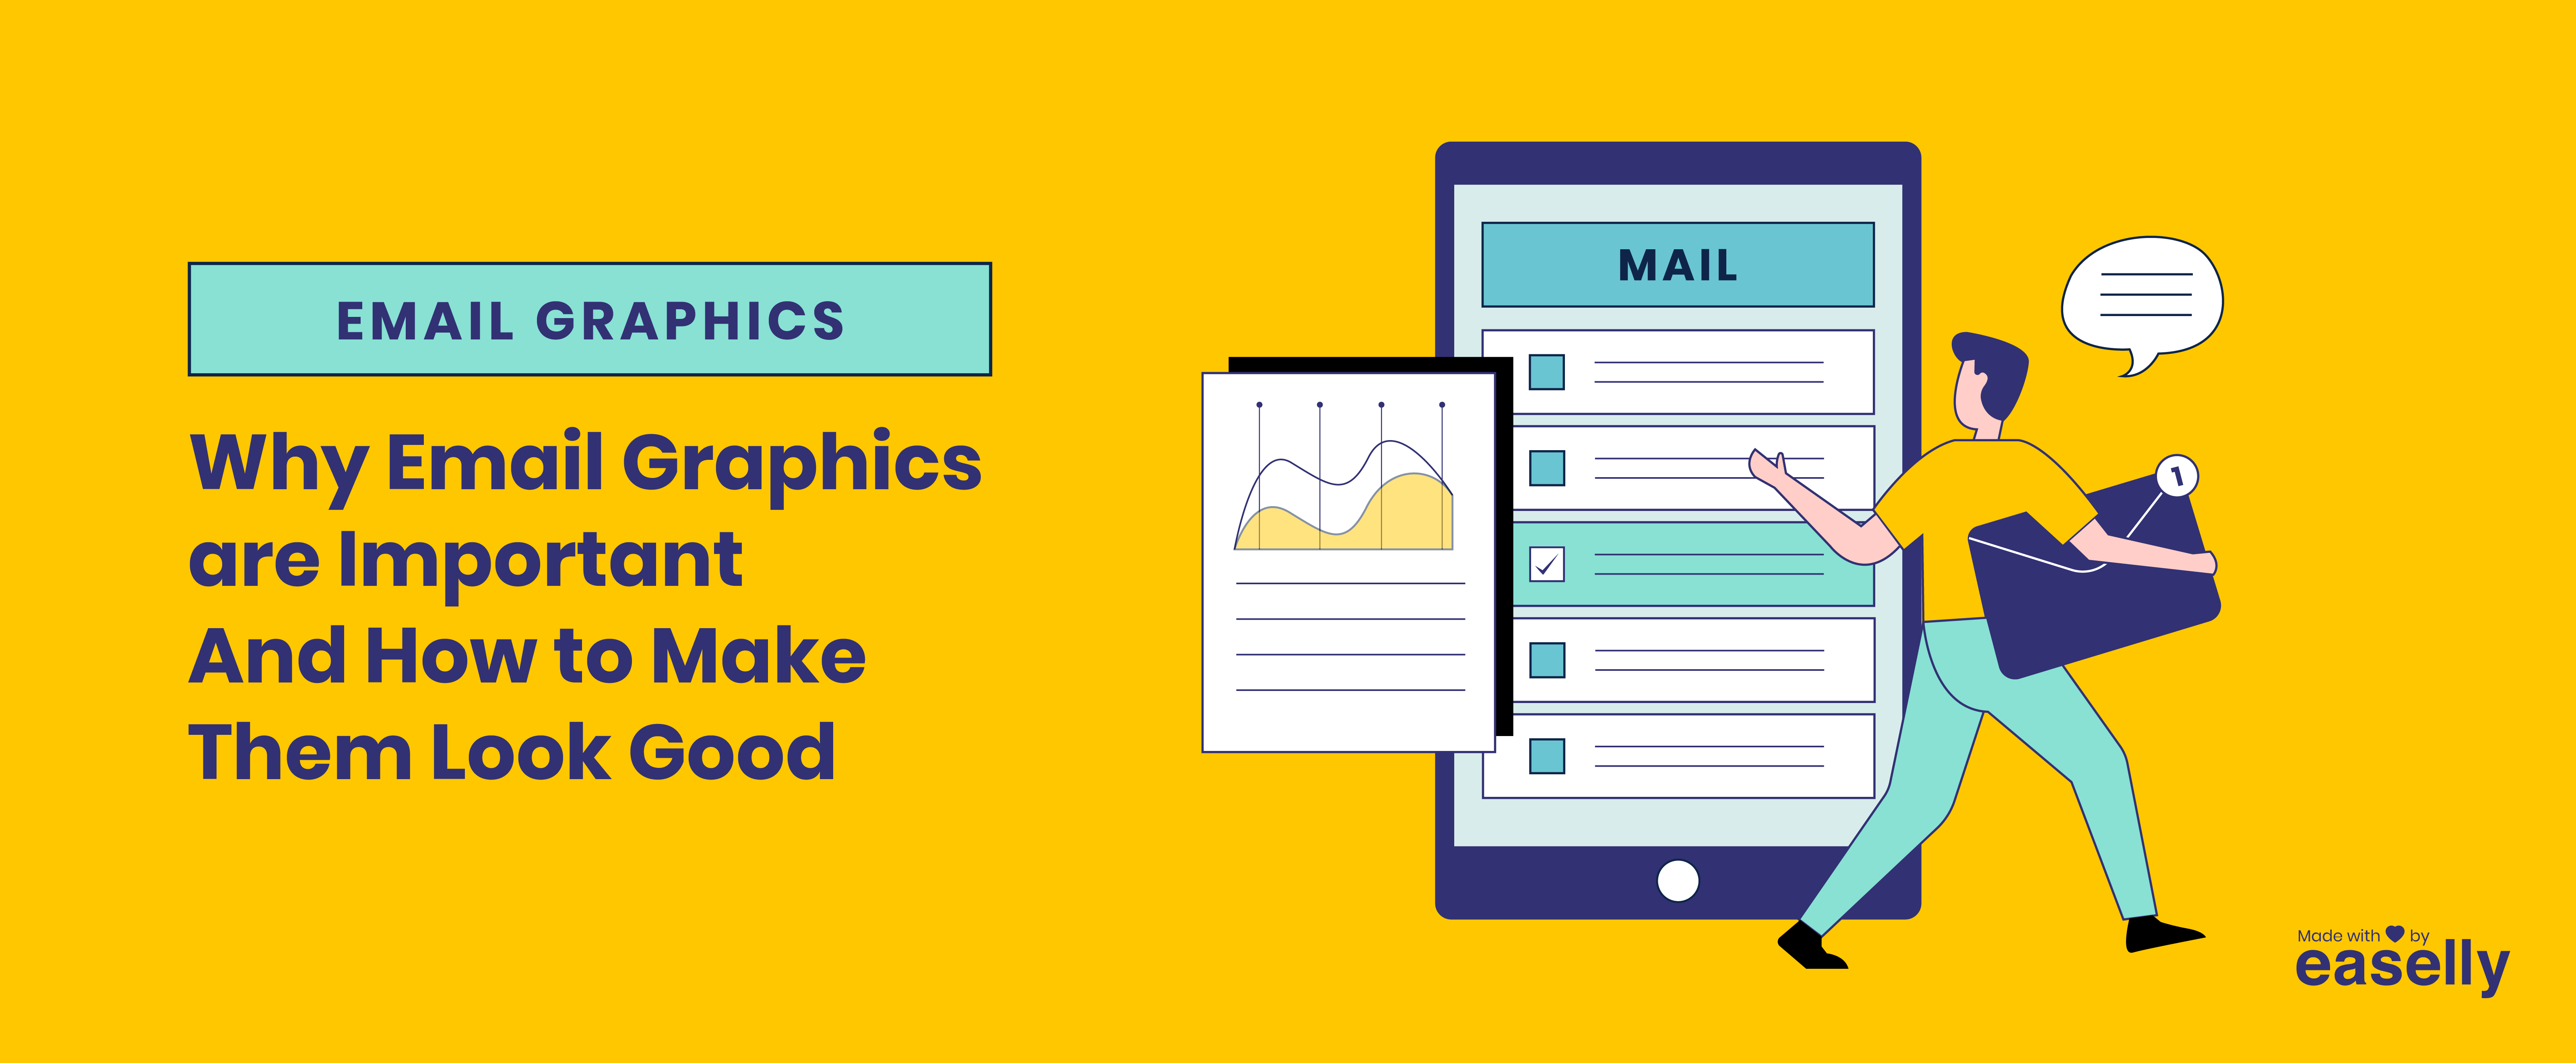 Creating Effective Email Graphics: Design Tips & Tricks